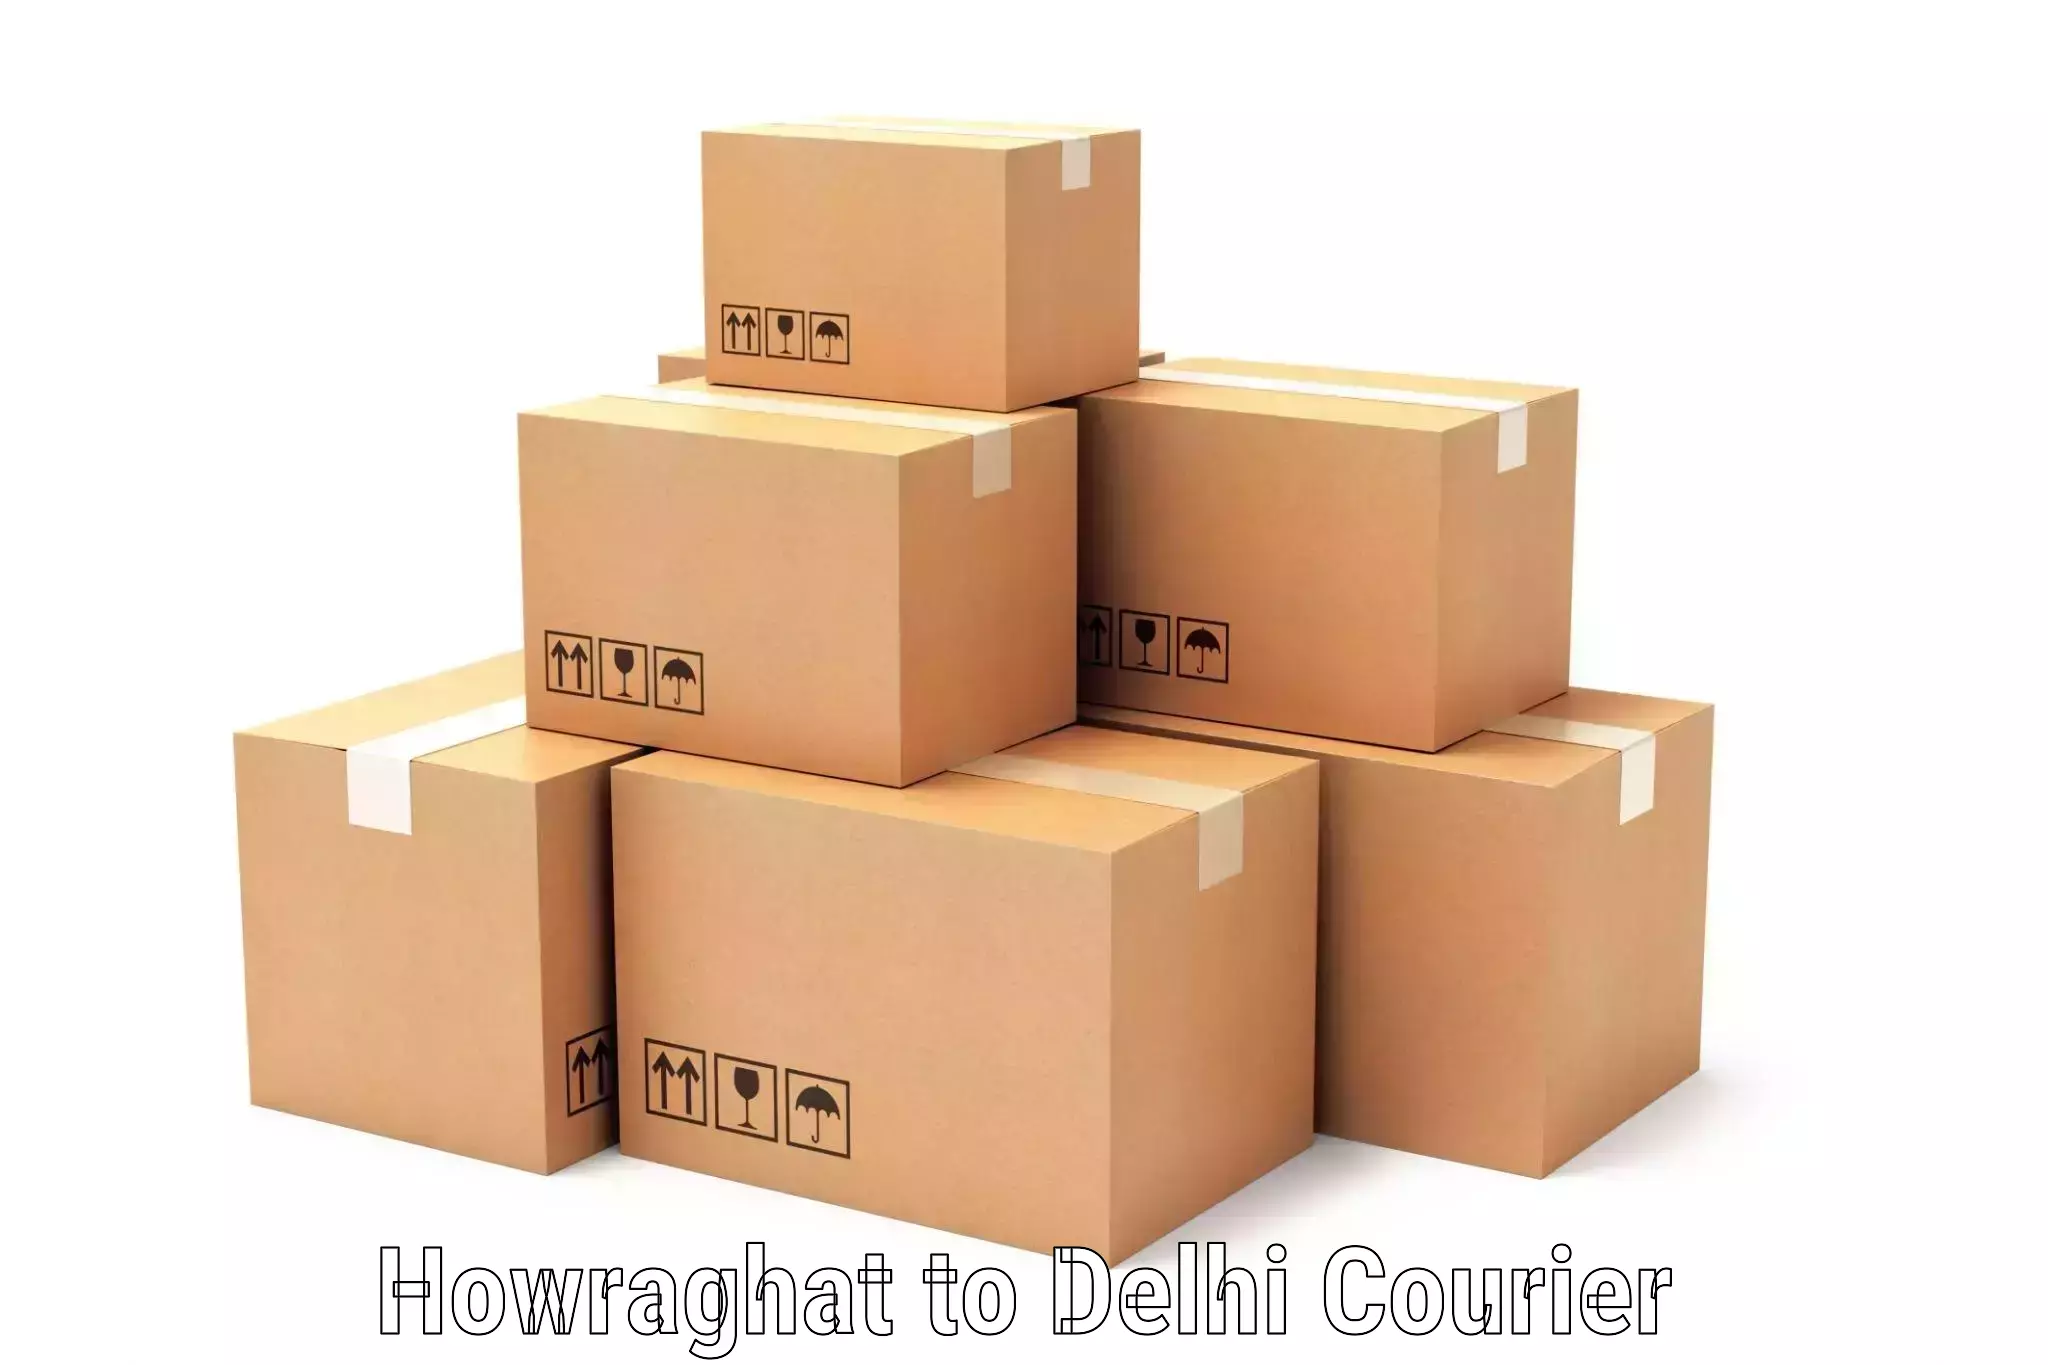 Innovative courier solutions Howraghat to Indraprastha